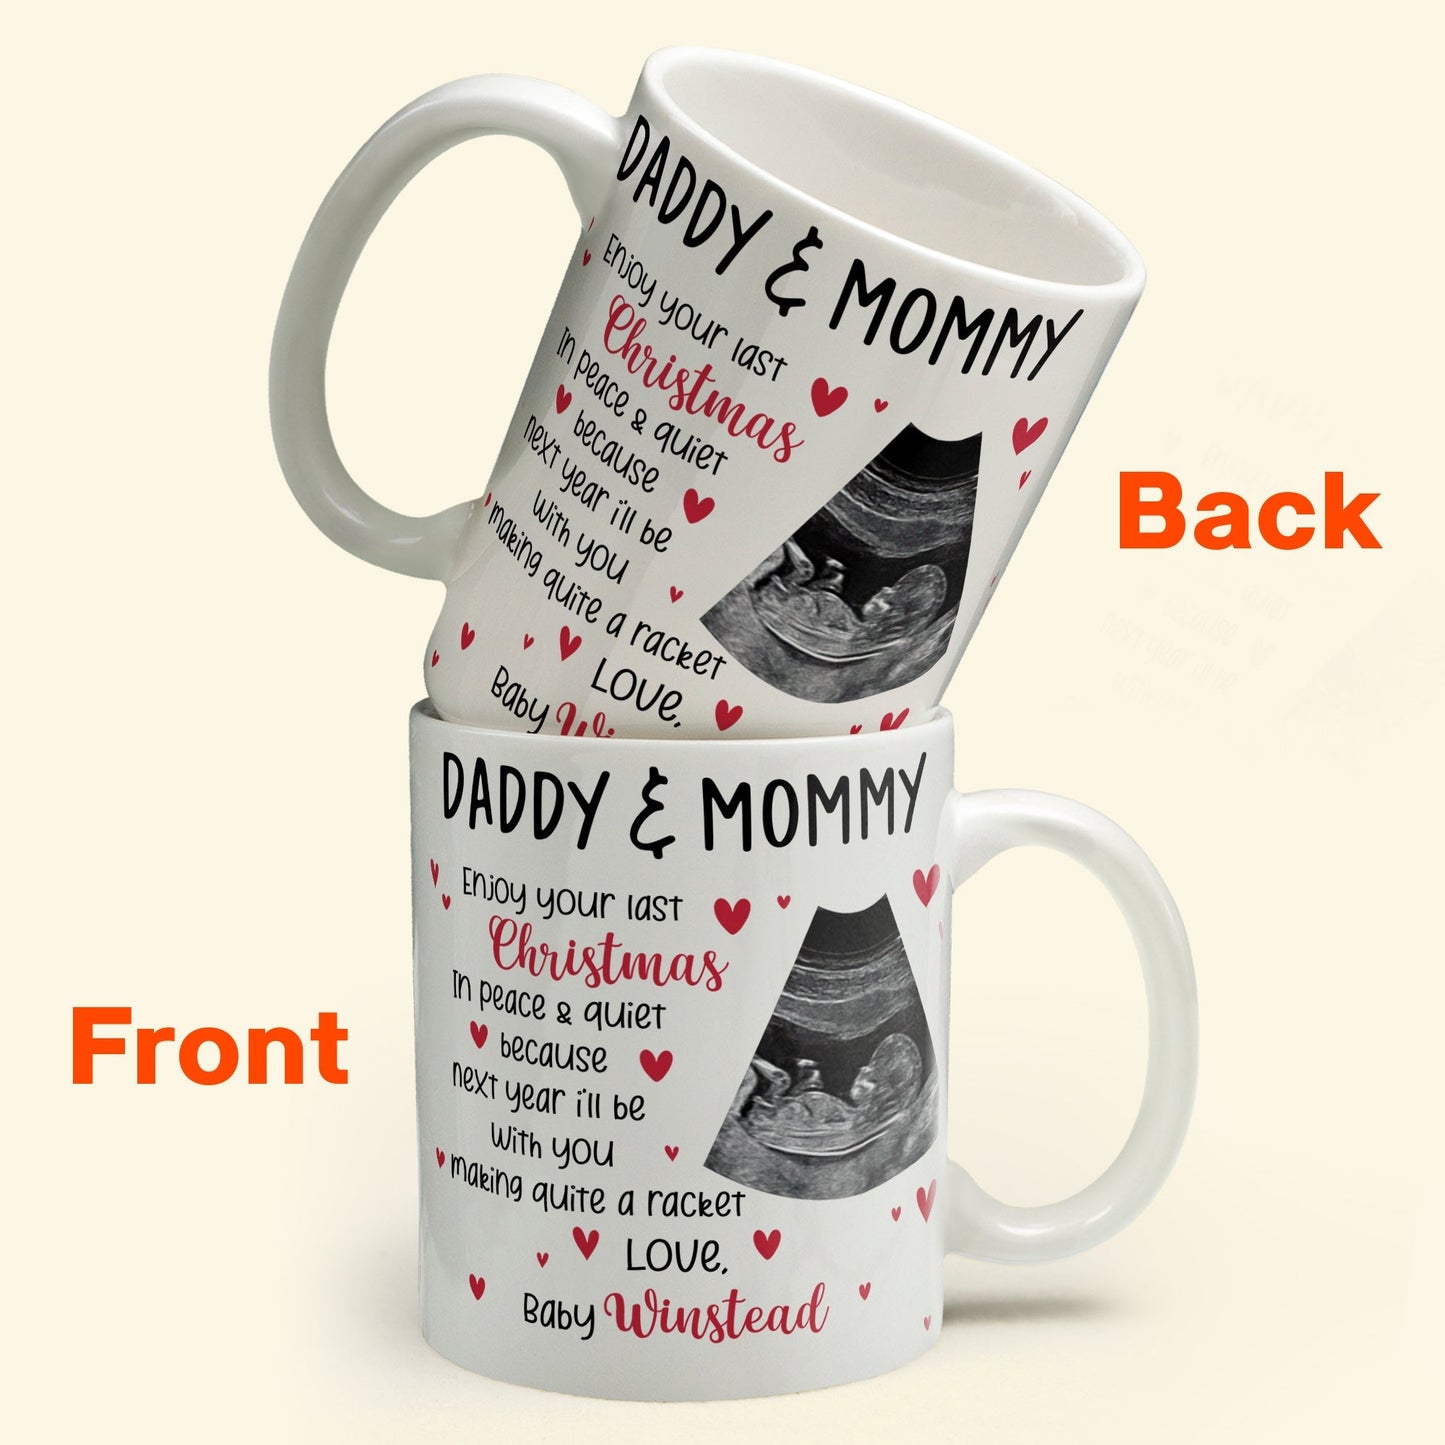 This Christmas, I'll Be Suggled Up In Mommy's Tummy - Personalized Mug - Christmas Gift For Daddy-To-Be, Father, Grandma, Grandpa, Family Members - From Baby, Bump